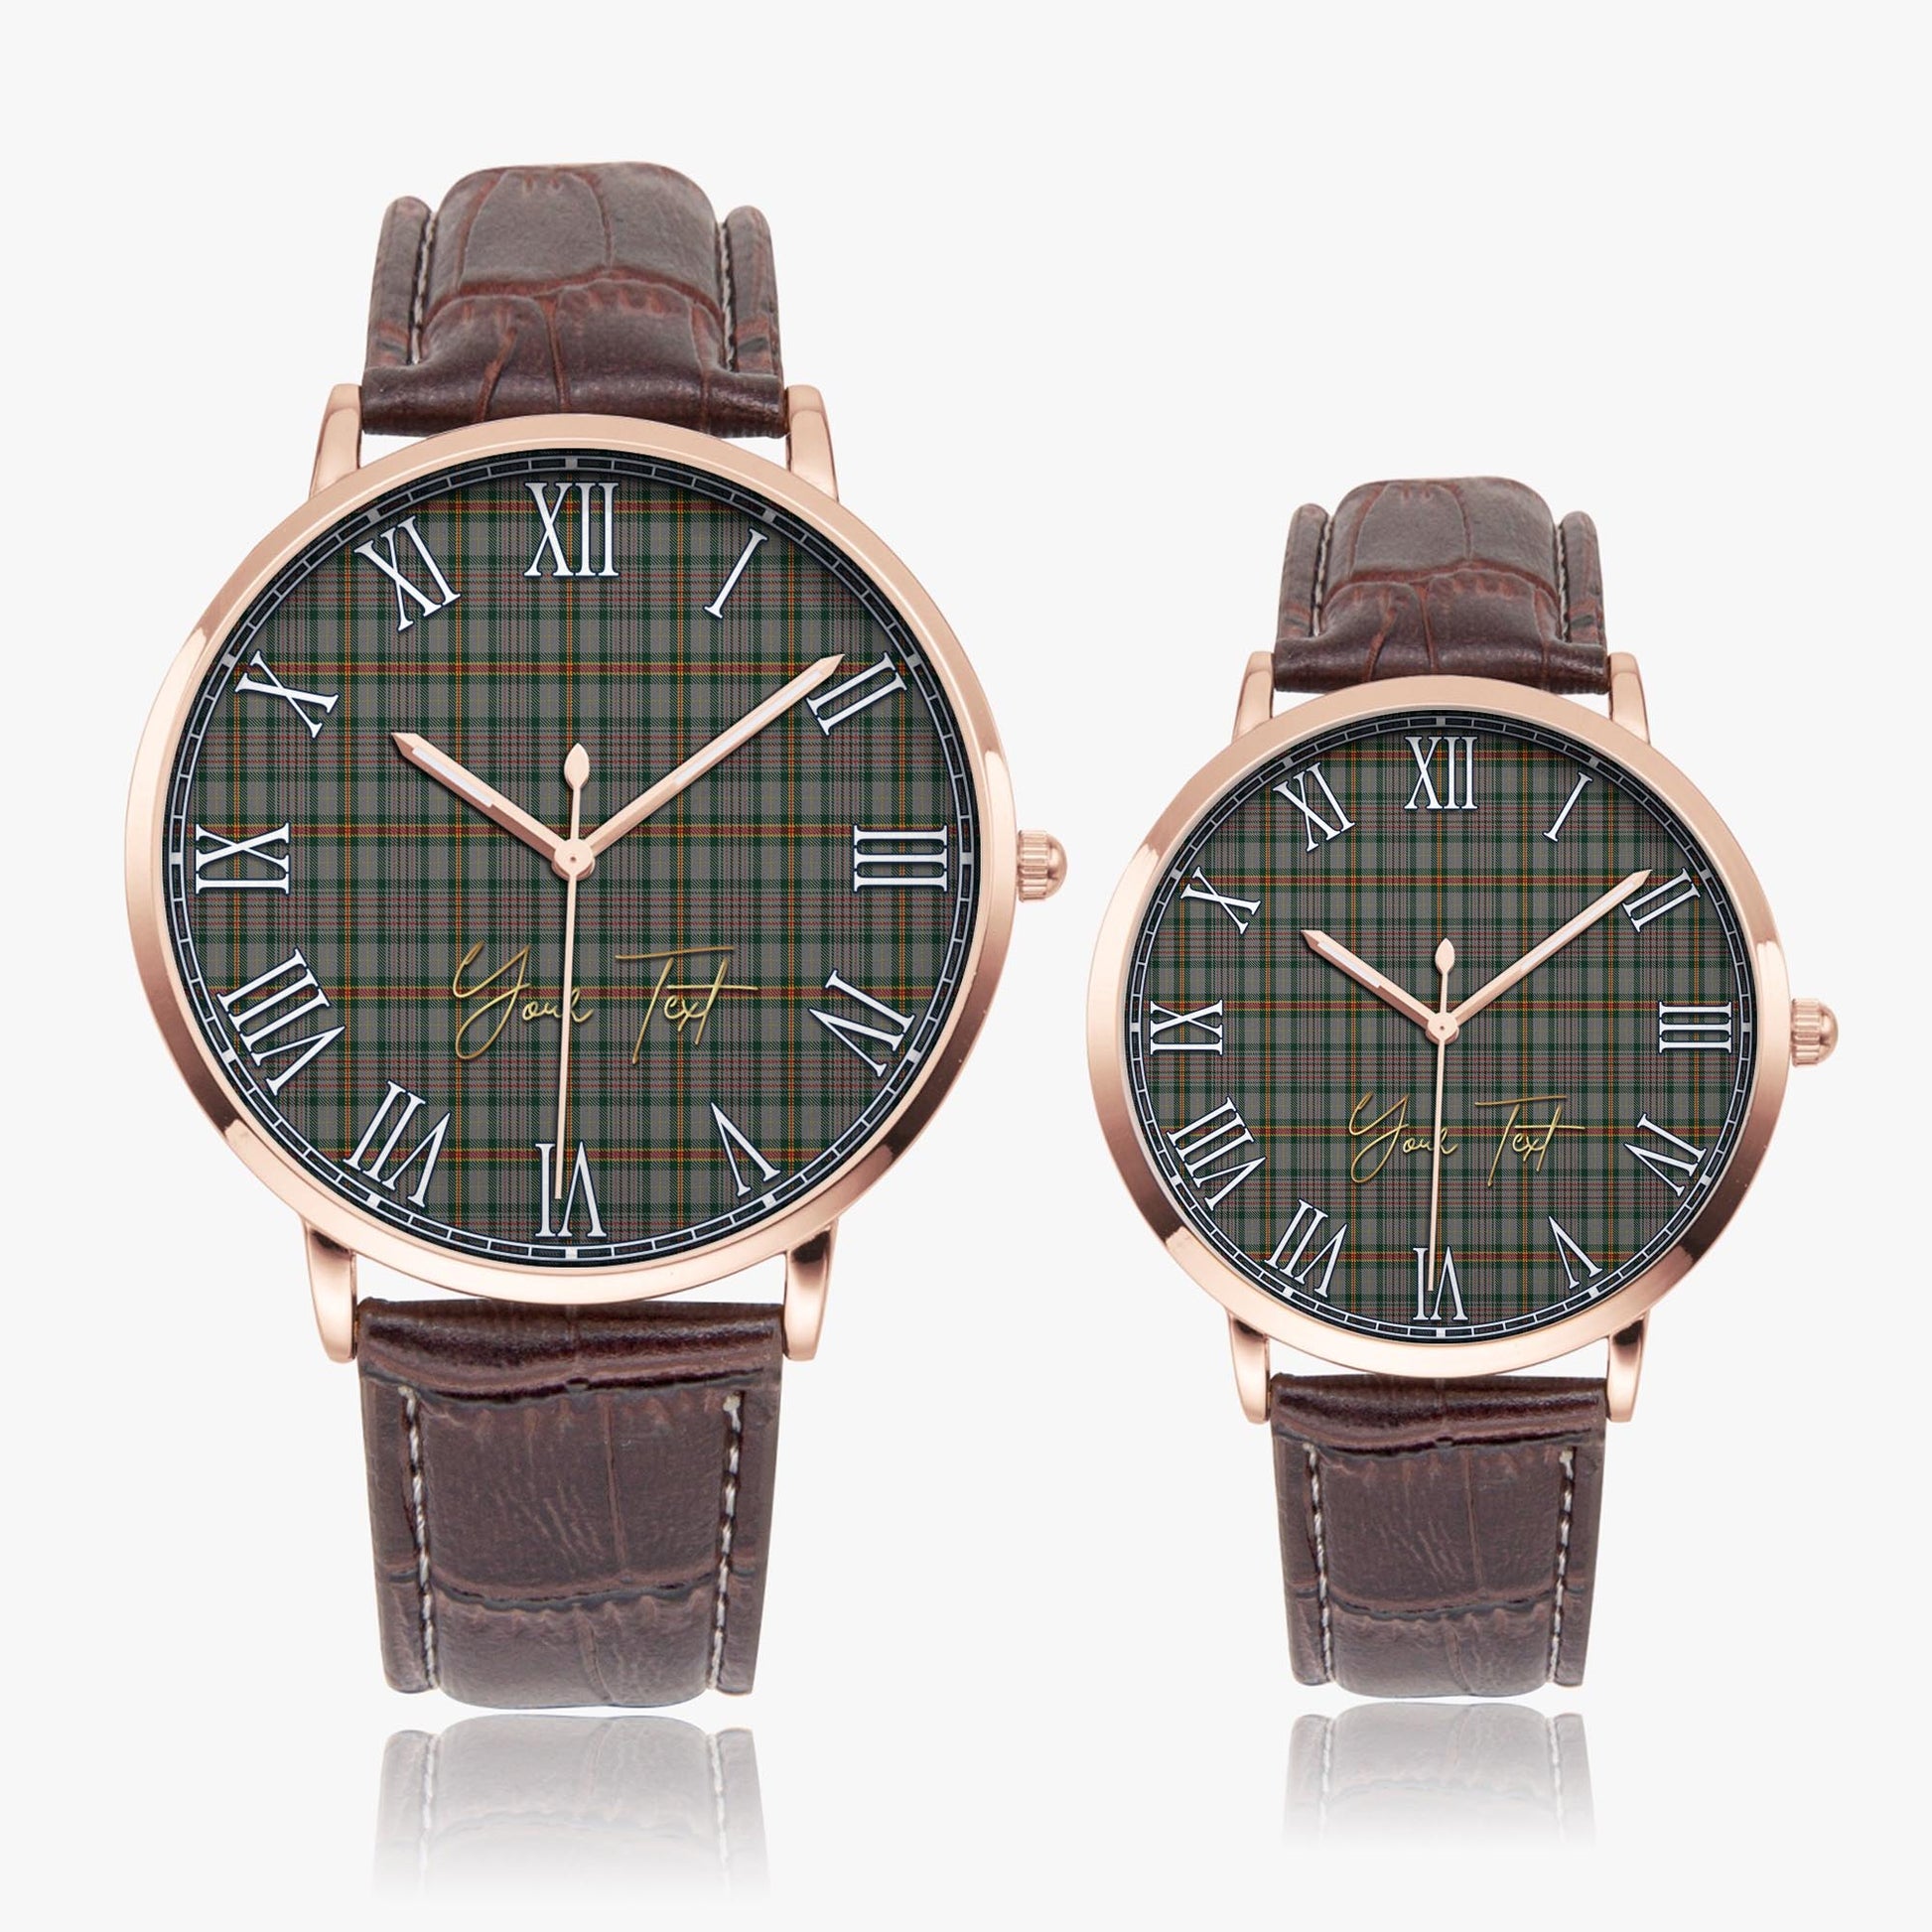 Howell of Wales Tartan Personalized Your Text Leather Trap Quartz Watch Ultra Thin Rose Gold Case With Brown Leather Strap - Tartanvibesclothing